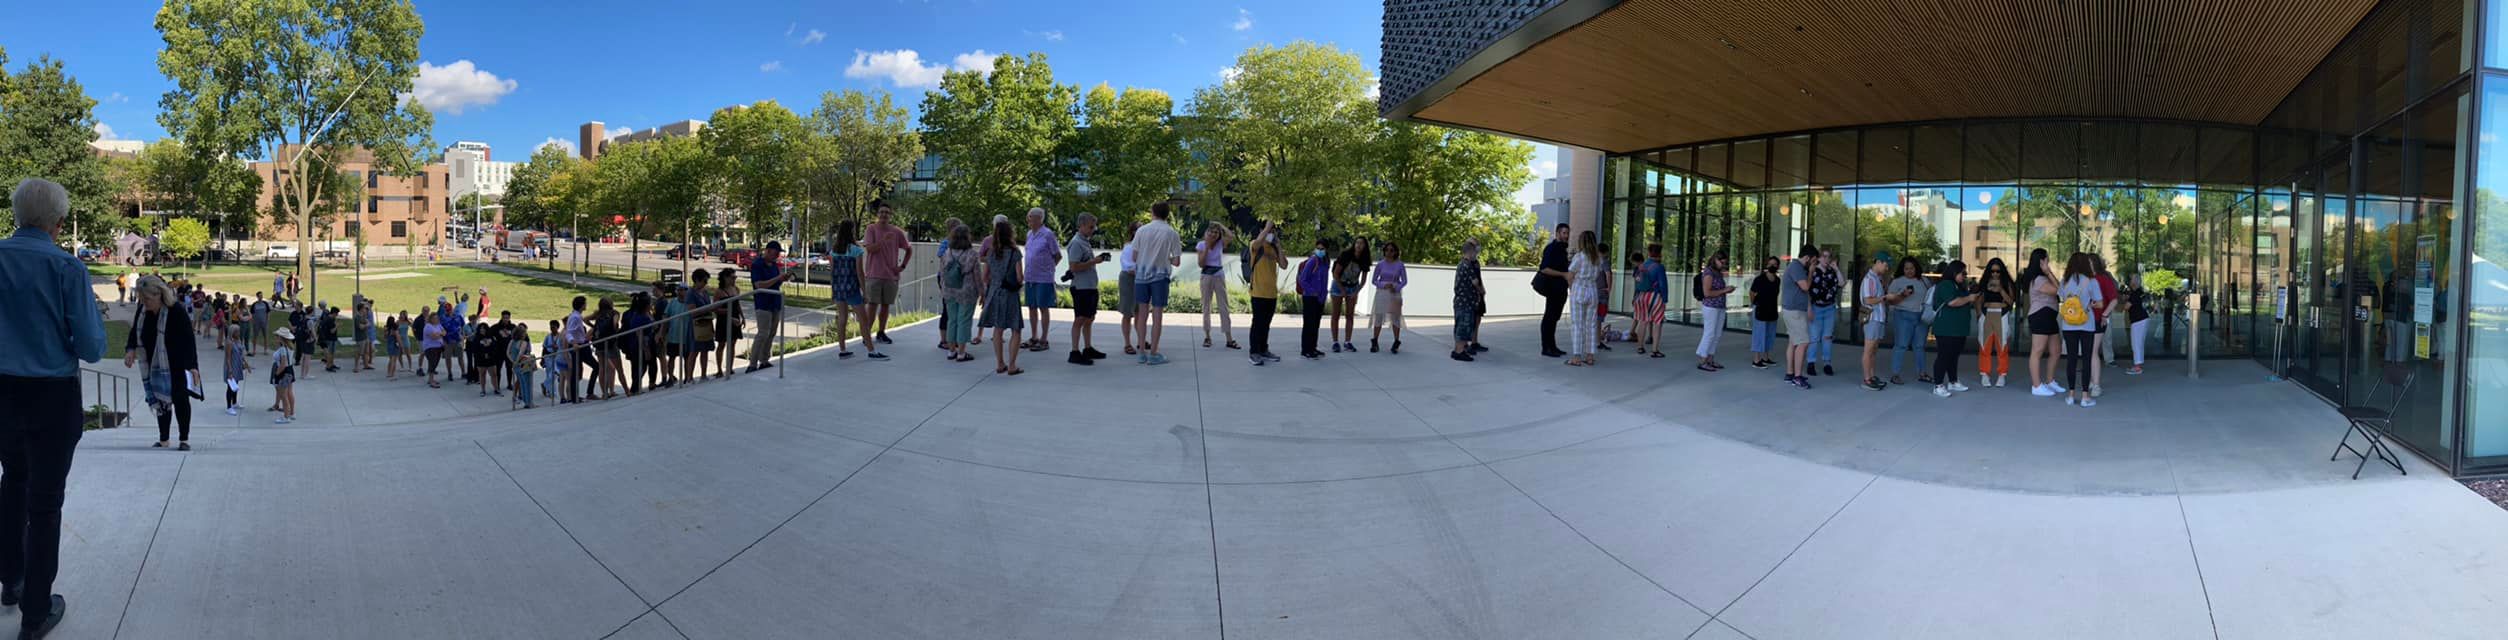 panoramic view of the line of visitor waiting to enter the new museum of art